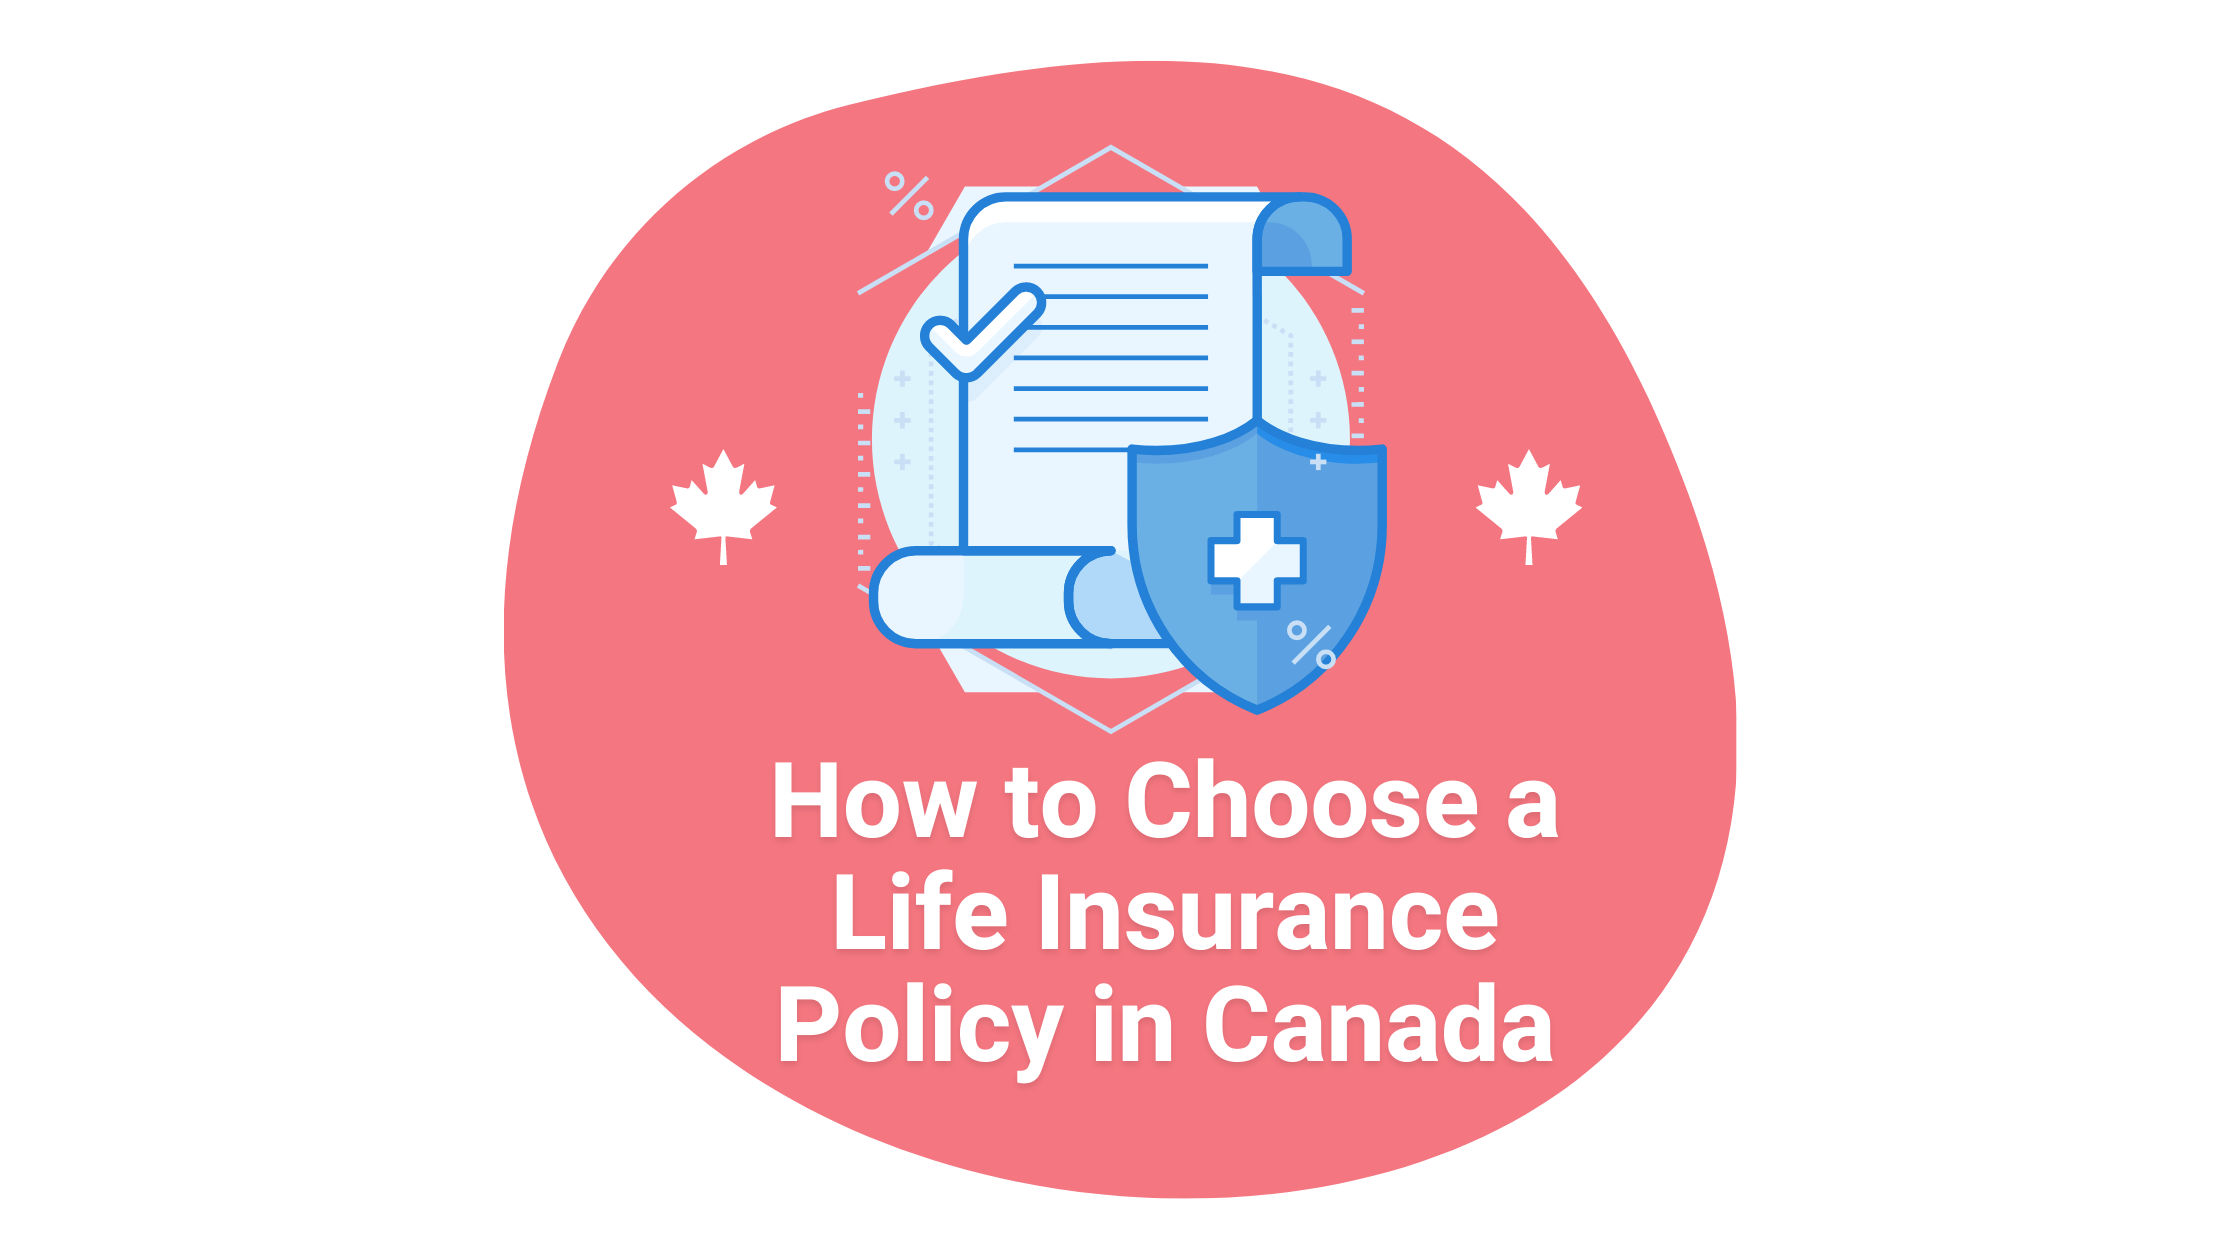 How to choose a Life Insurance Policy in Canada